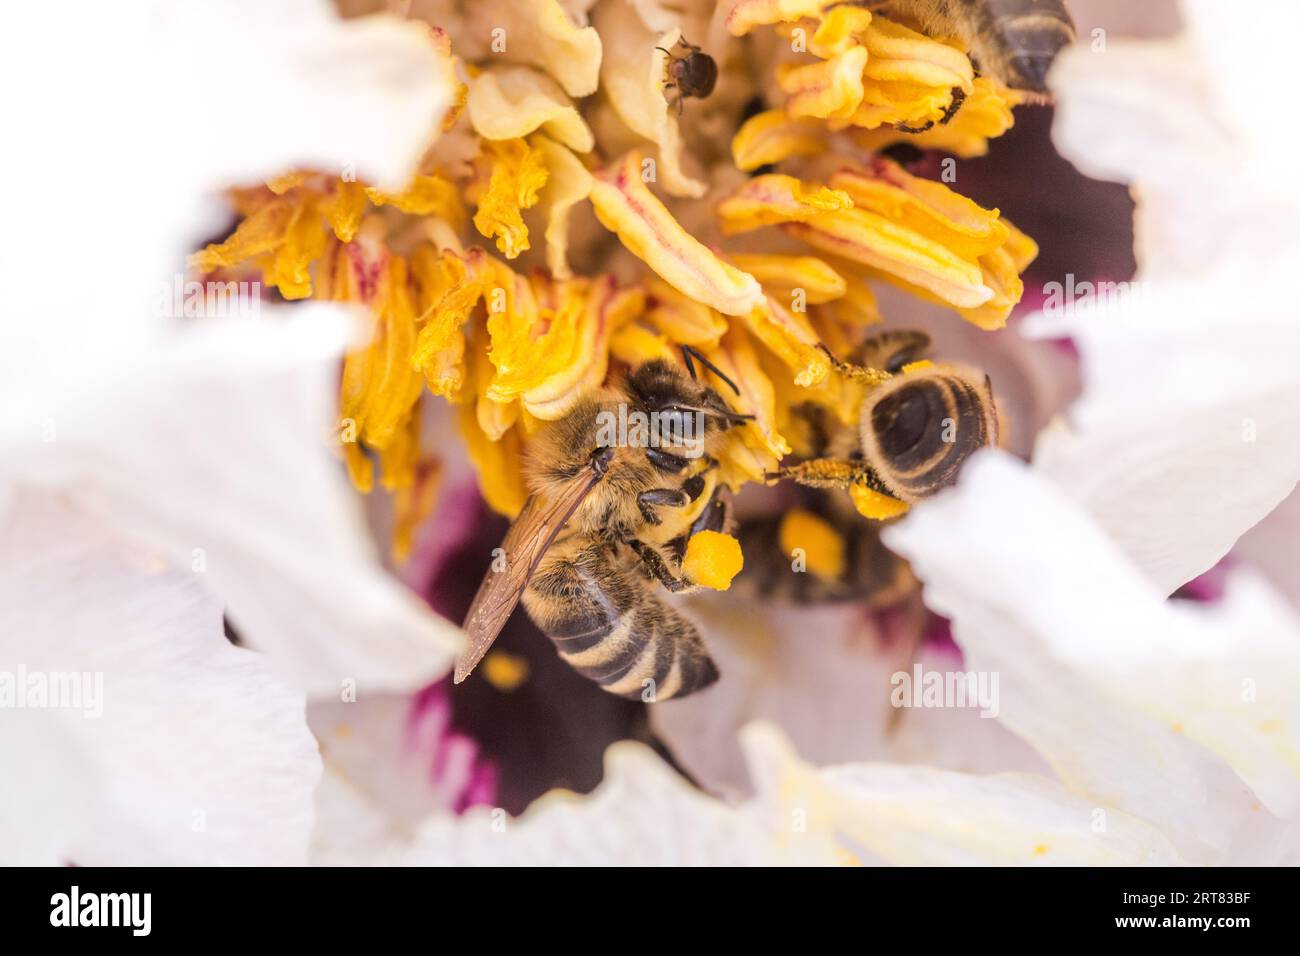 Bees collect pollen from Paeonia suffruticosa, tree peony or paeony flower. There are many bees inside flower. Stock Photo